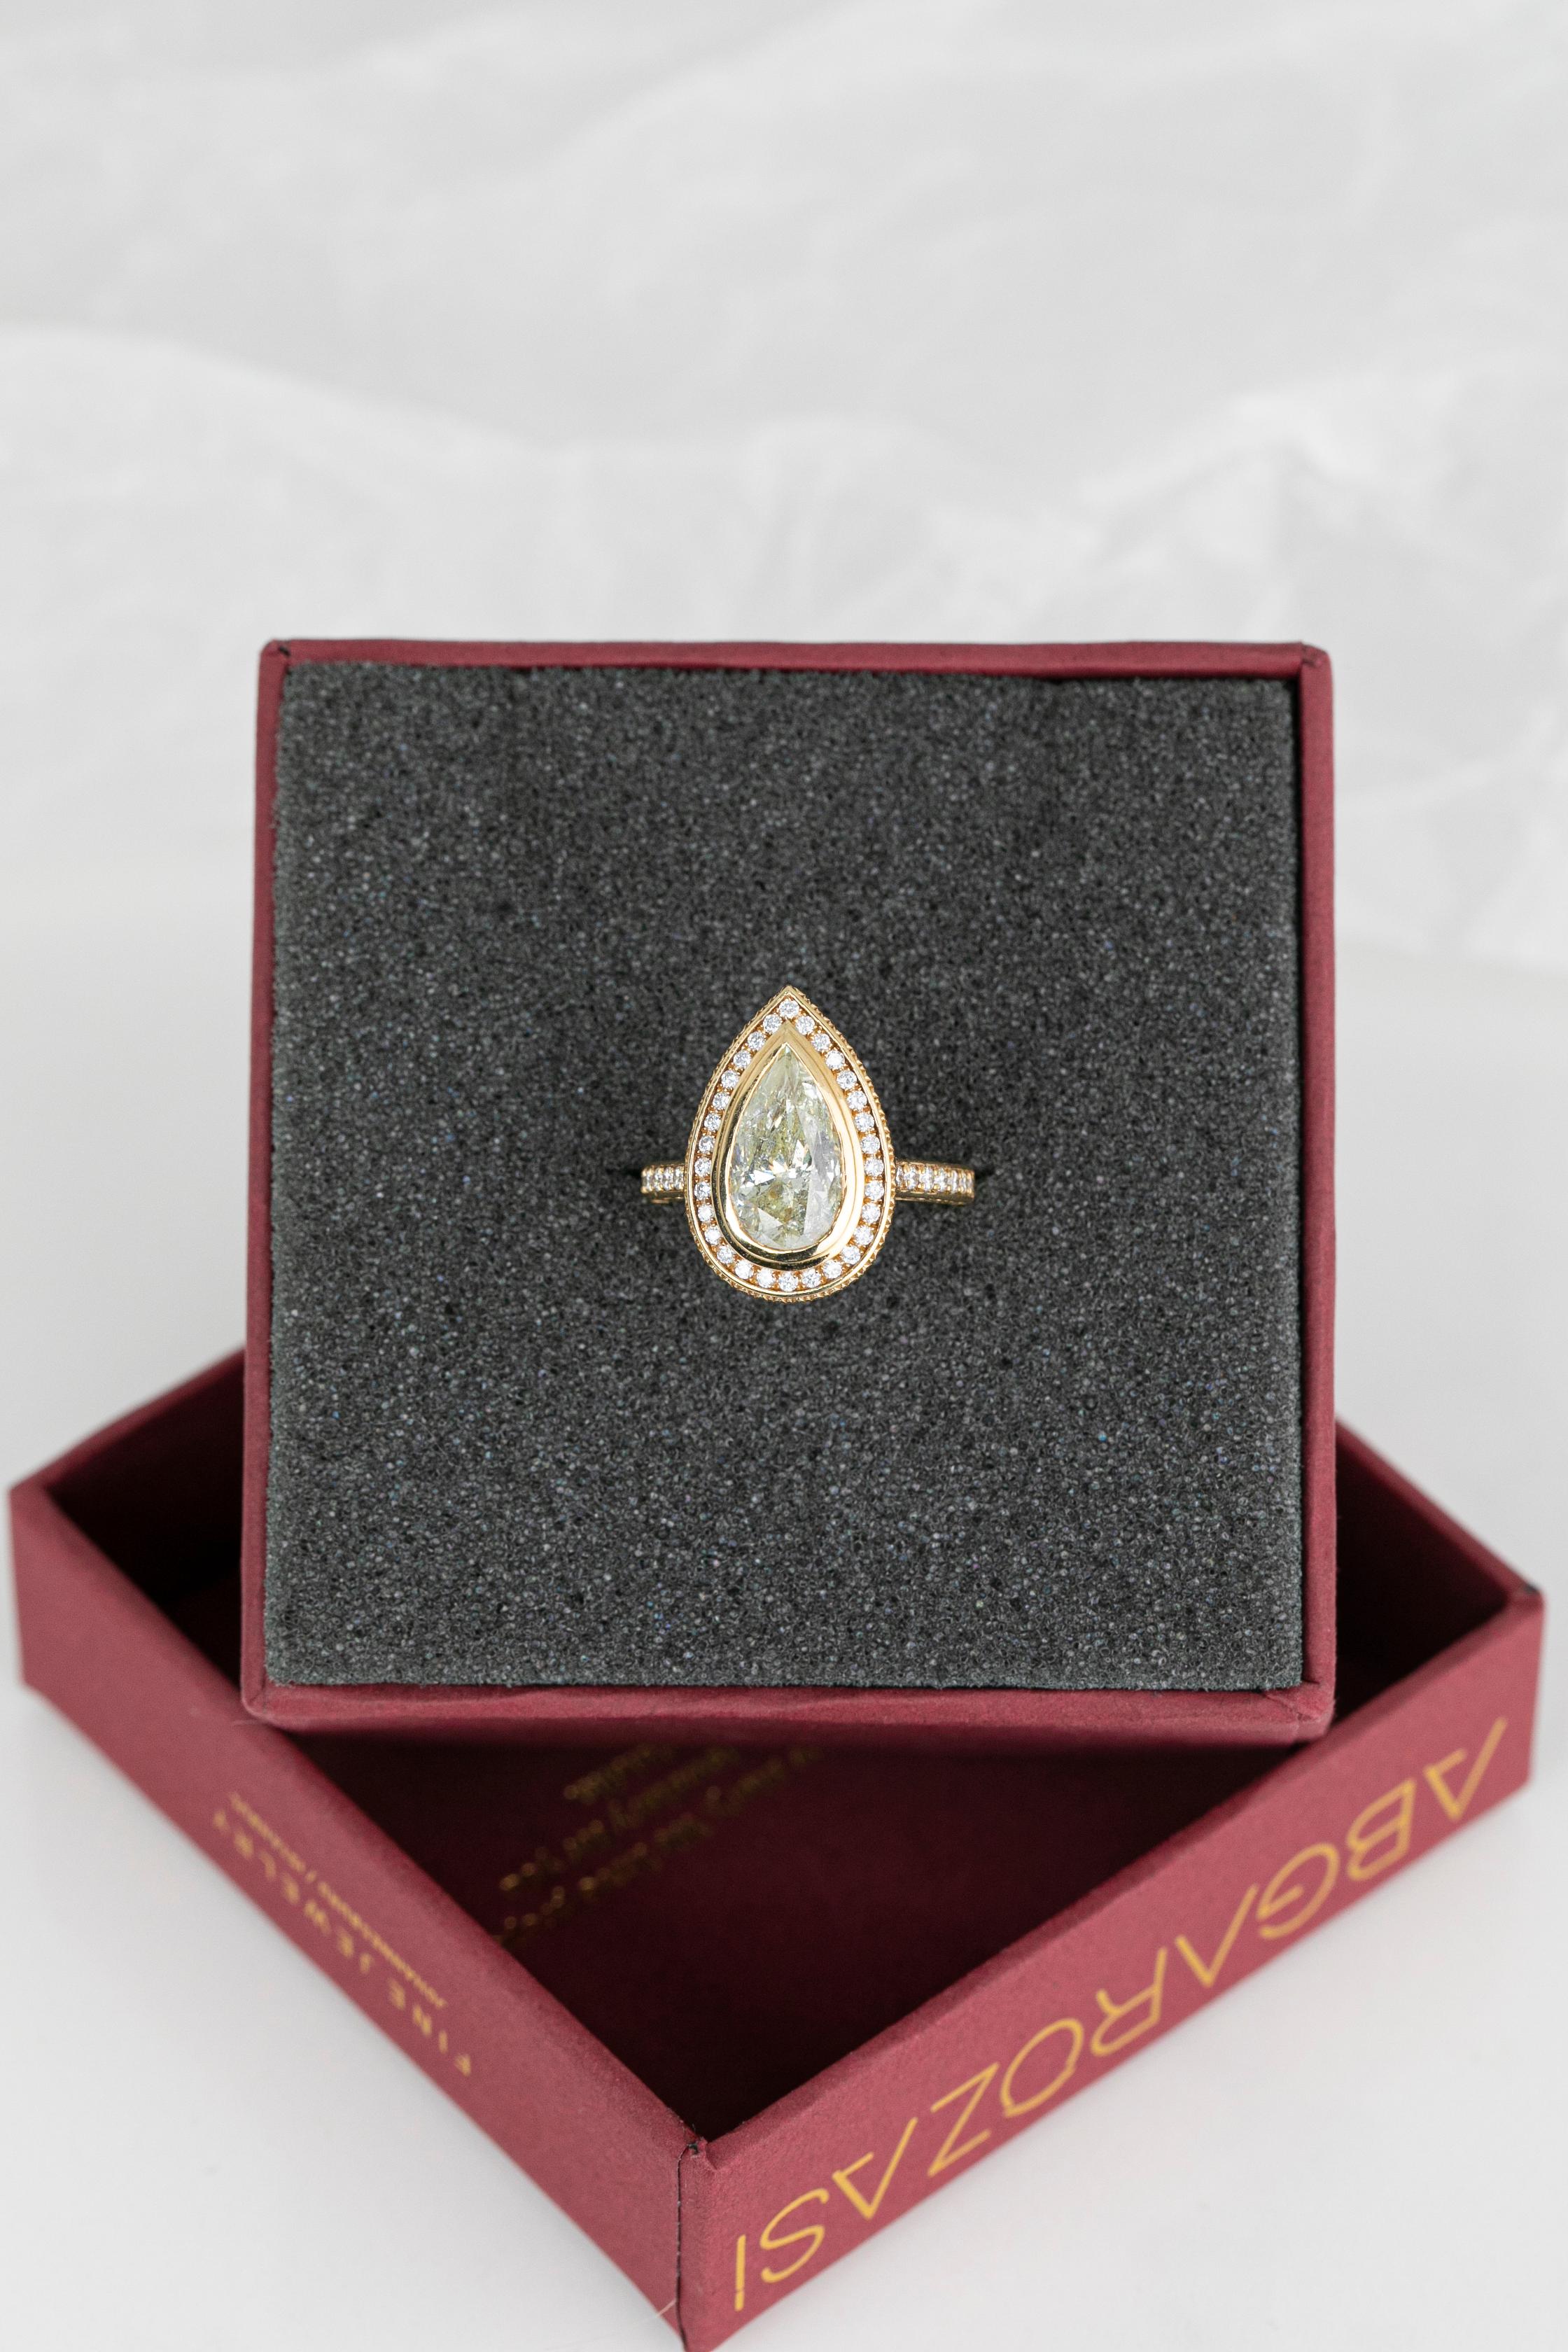 Vintage Ring 3.46 Carat Diamond Pear Drop Cut Big Stone and 14k Solid Gold Ring For Sale 3